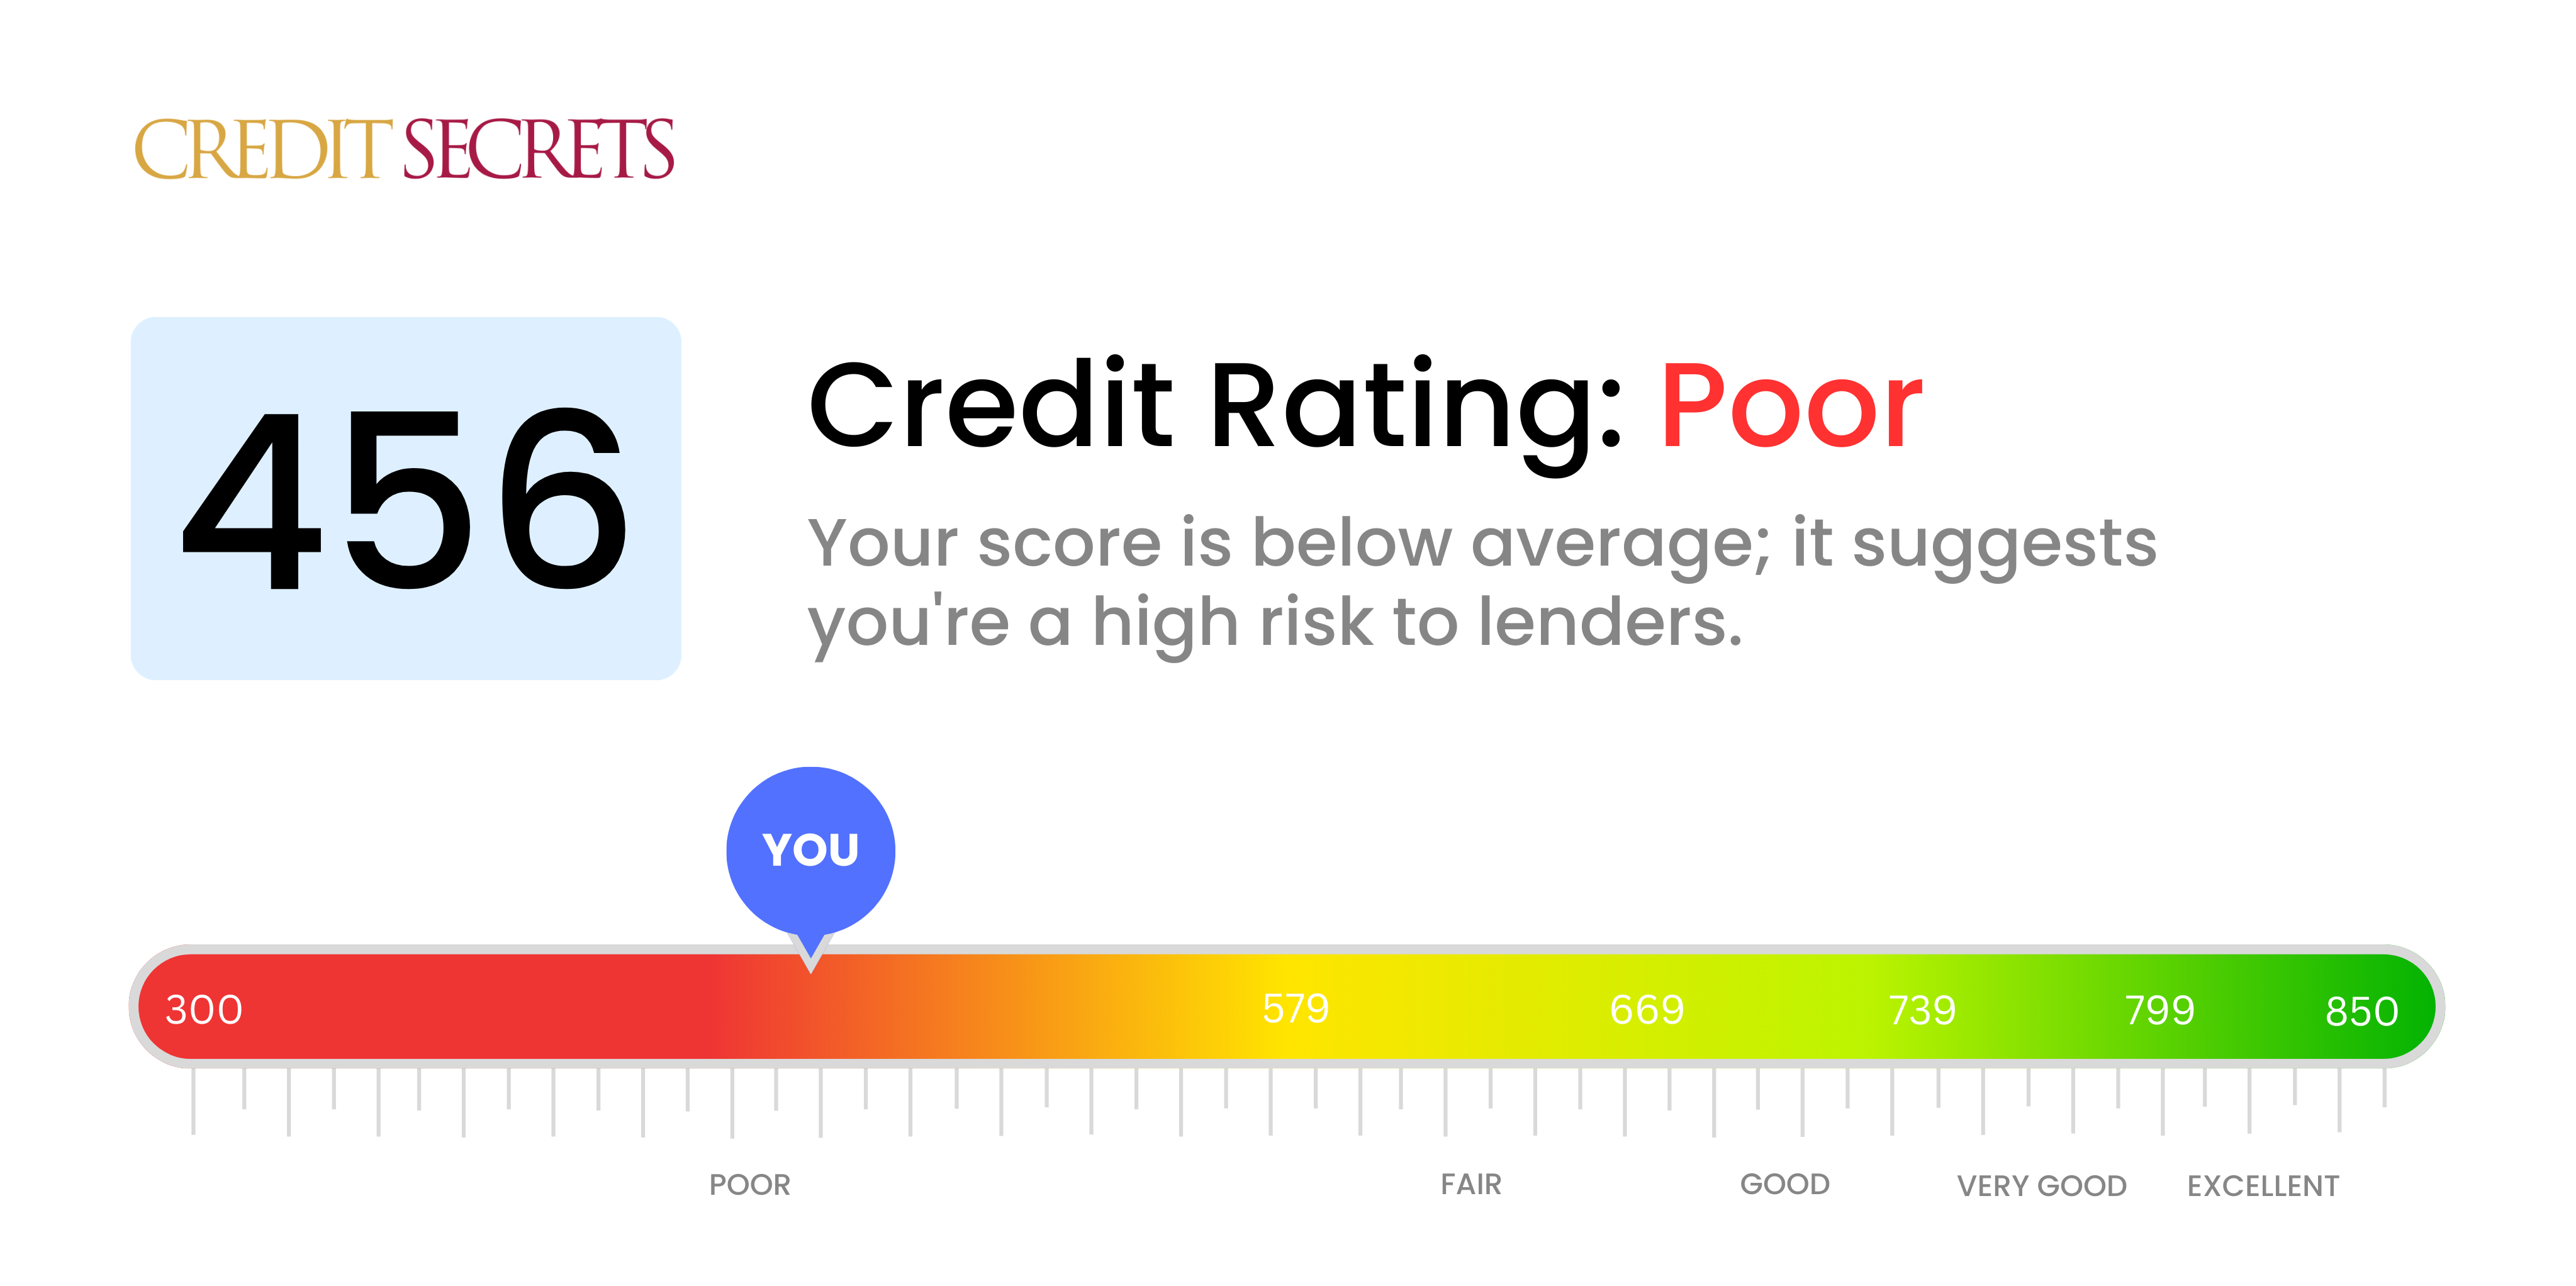 Is 456 a good credit score?